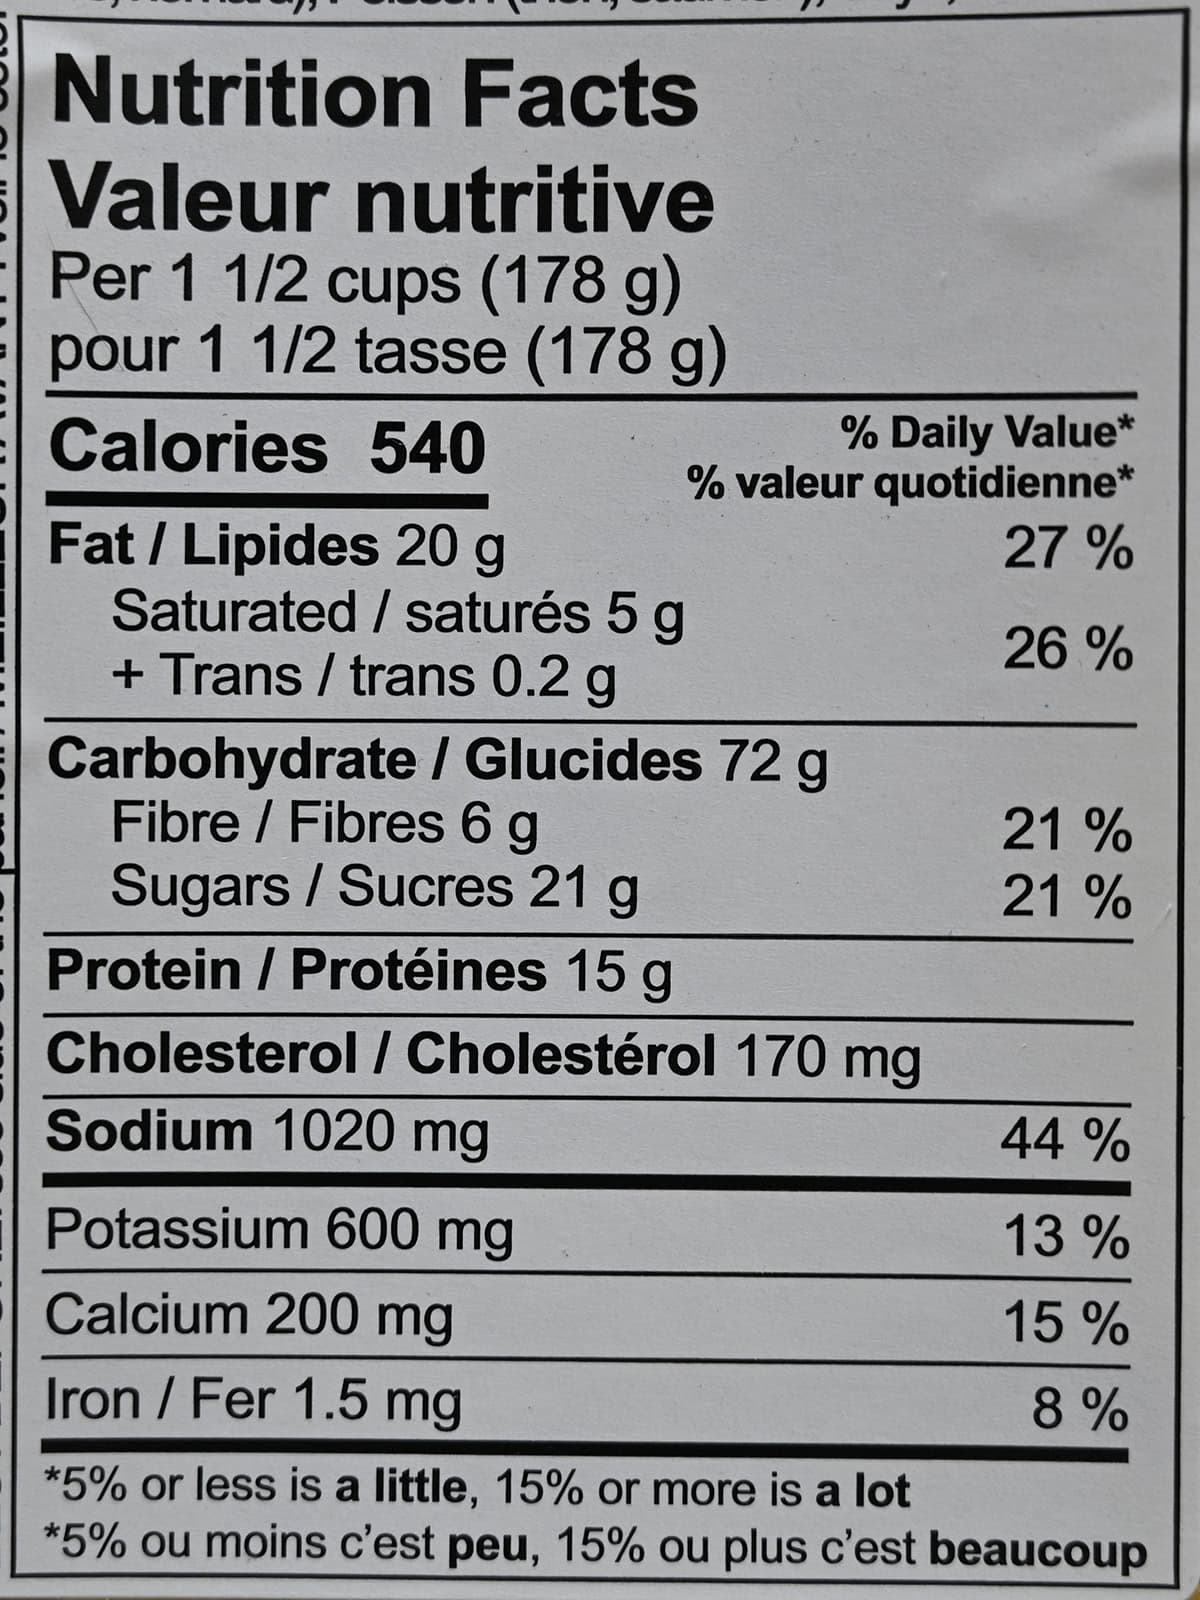 Image of the nutrition facts for the ravioli from the back of the package.